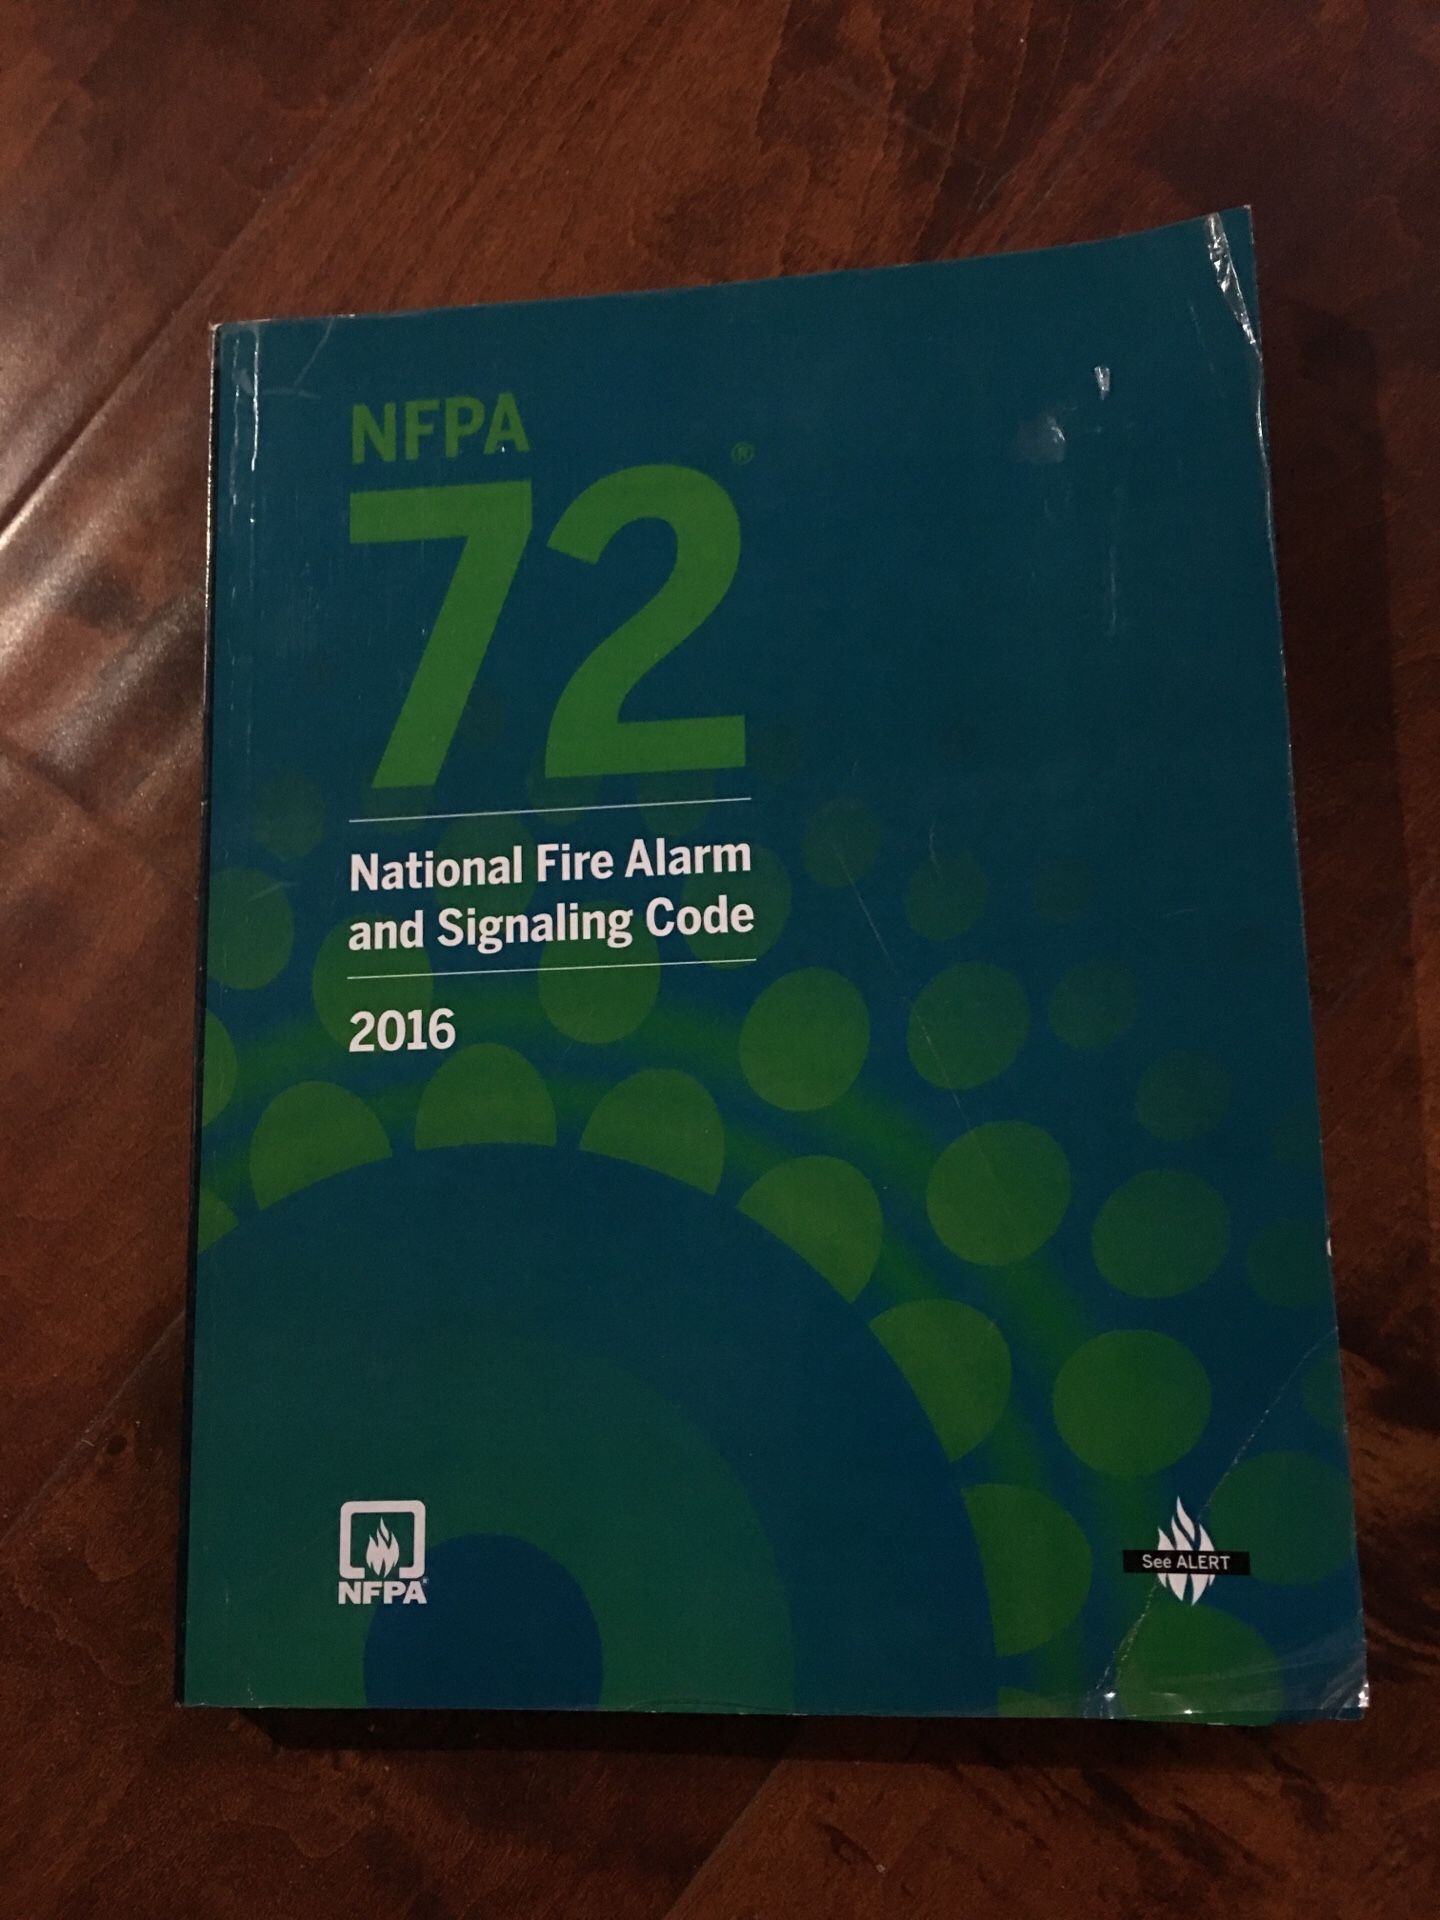 National Fire Protection Association NFPA 72: National Fire Alarm and Signaling Code, 2016 Edition ISBN-13: 978-1455911646,